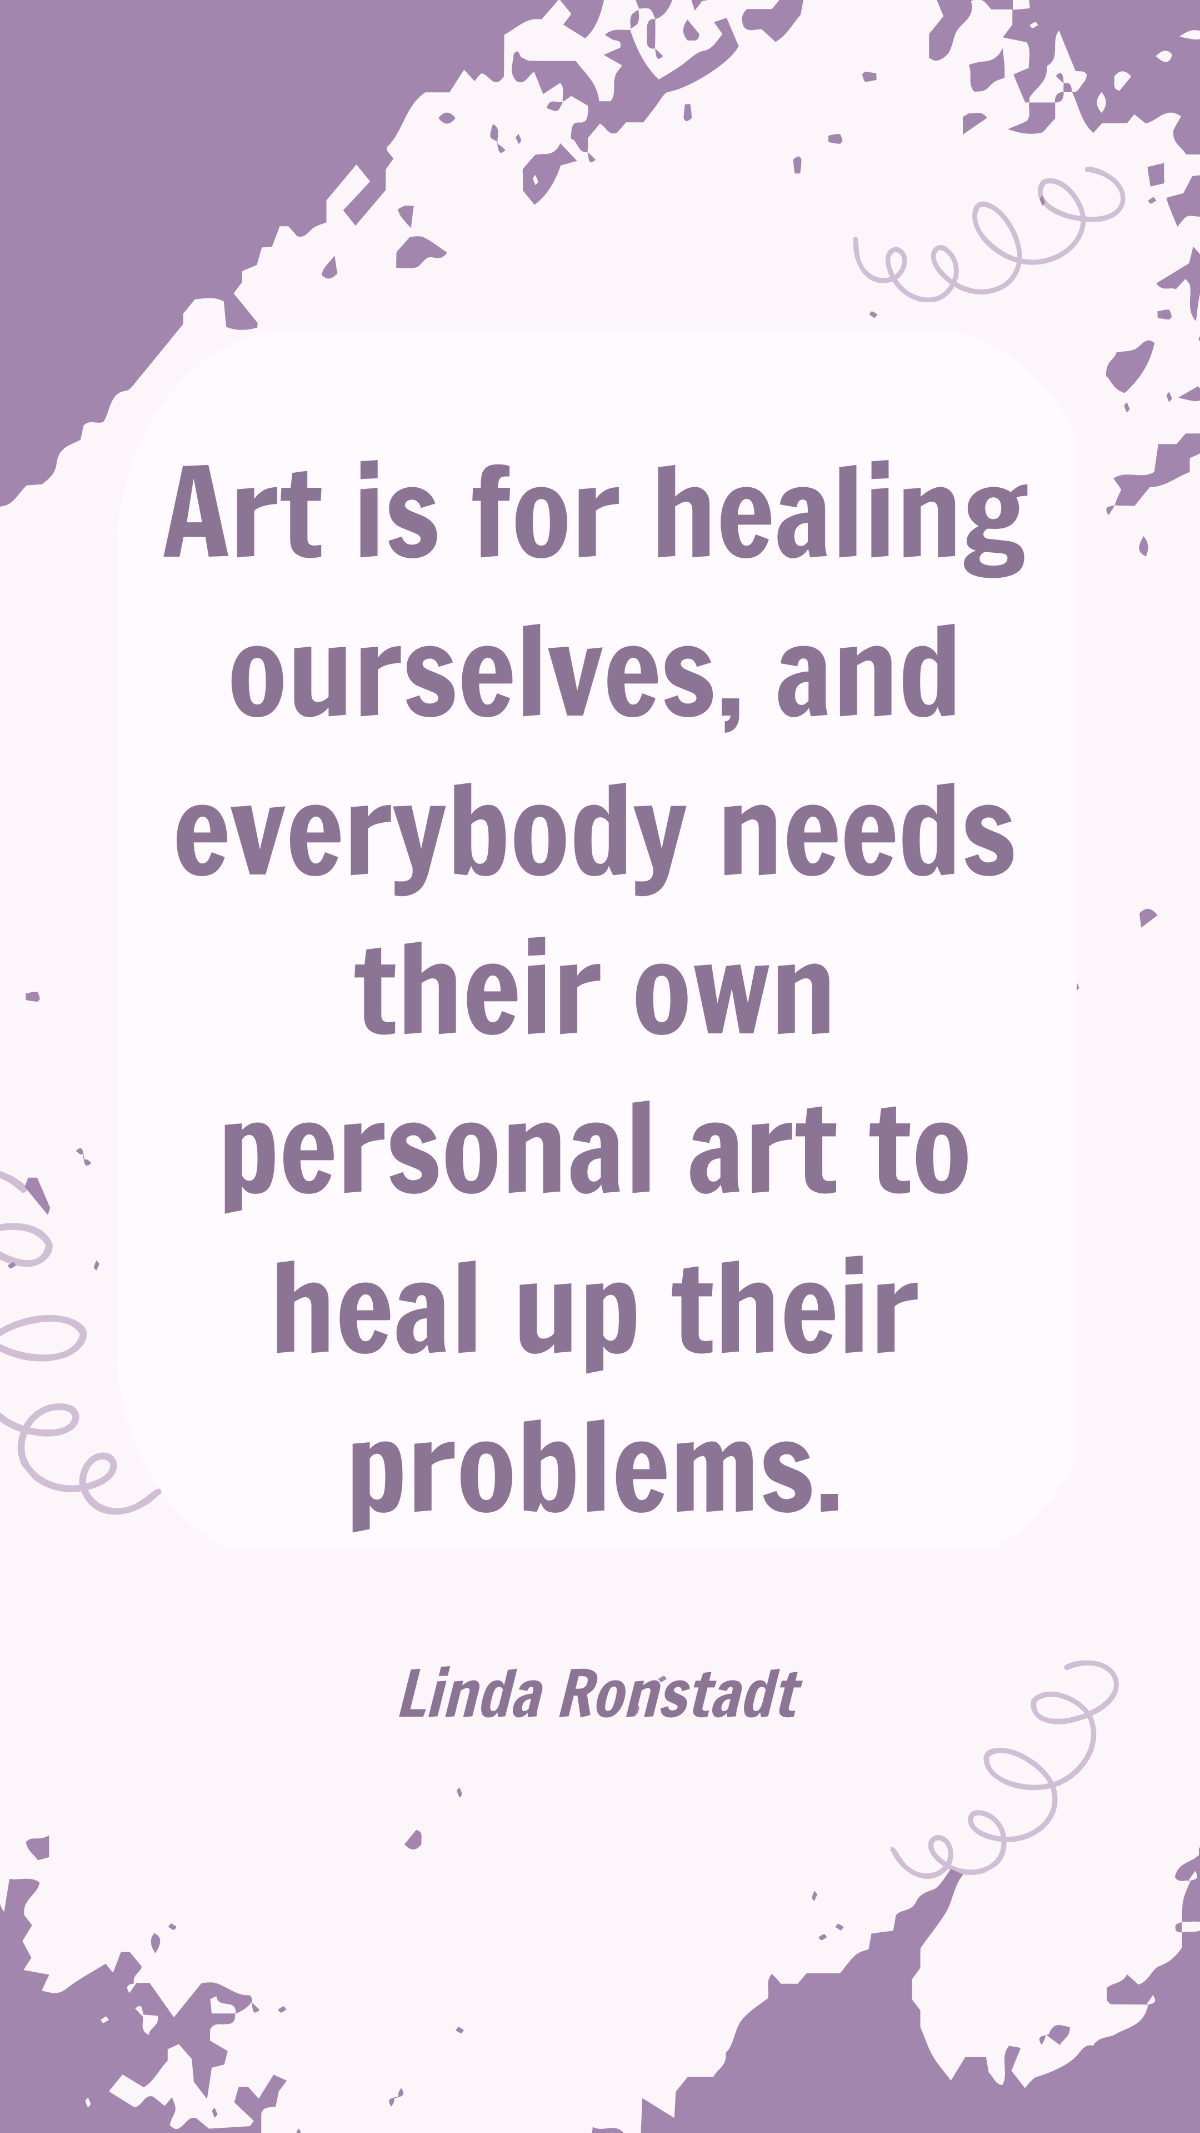 Linda Ronstadt - Art is for healing ourselves, and everybody needs their own personal art to heal up their problems. Template